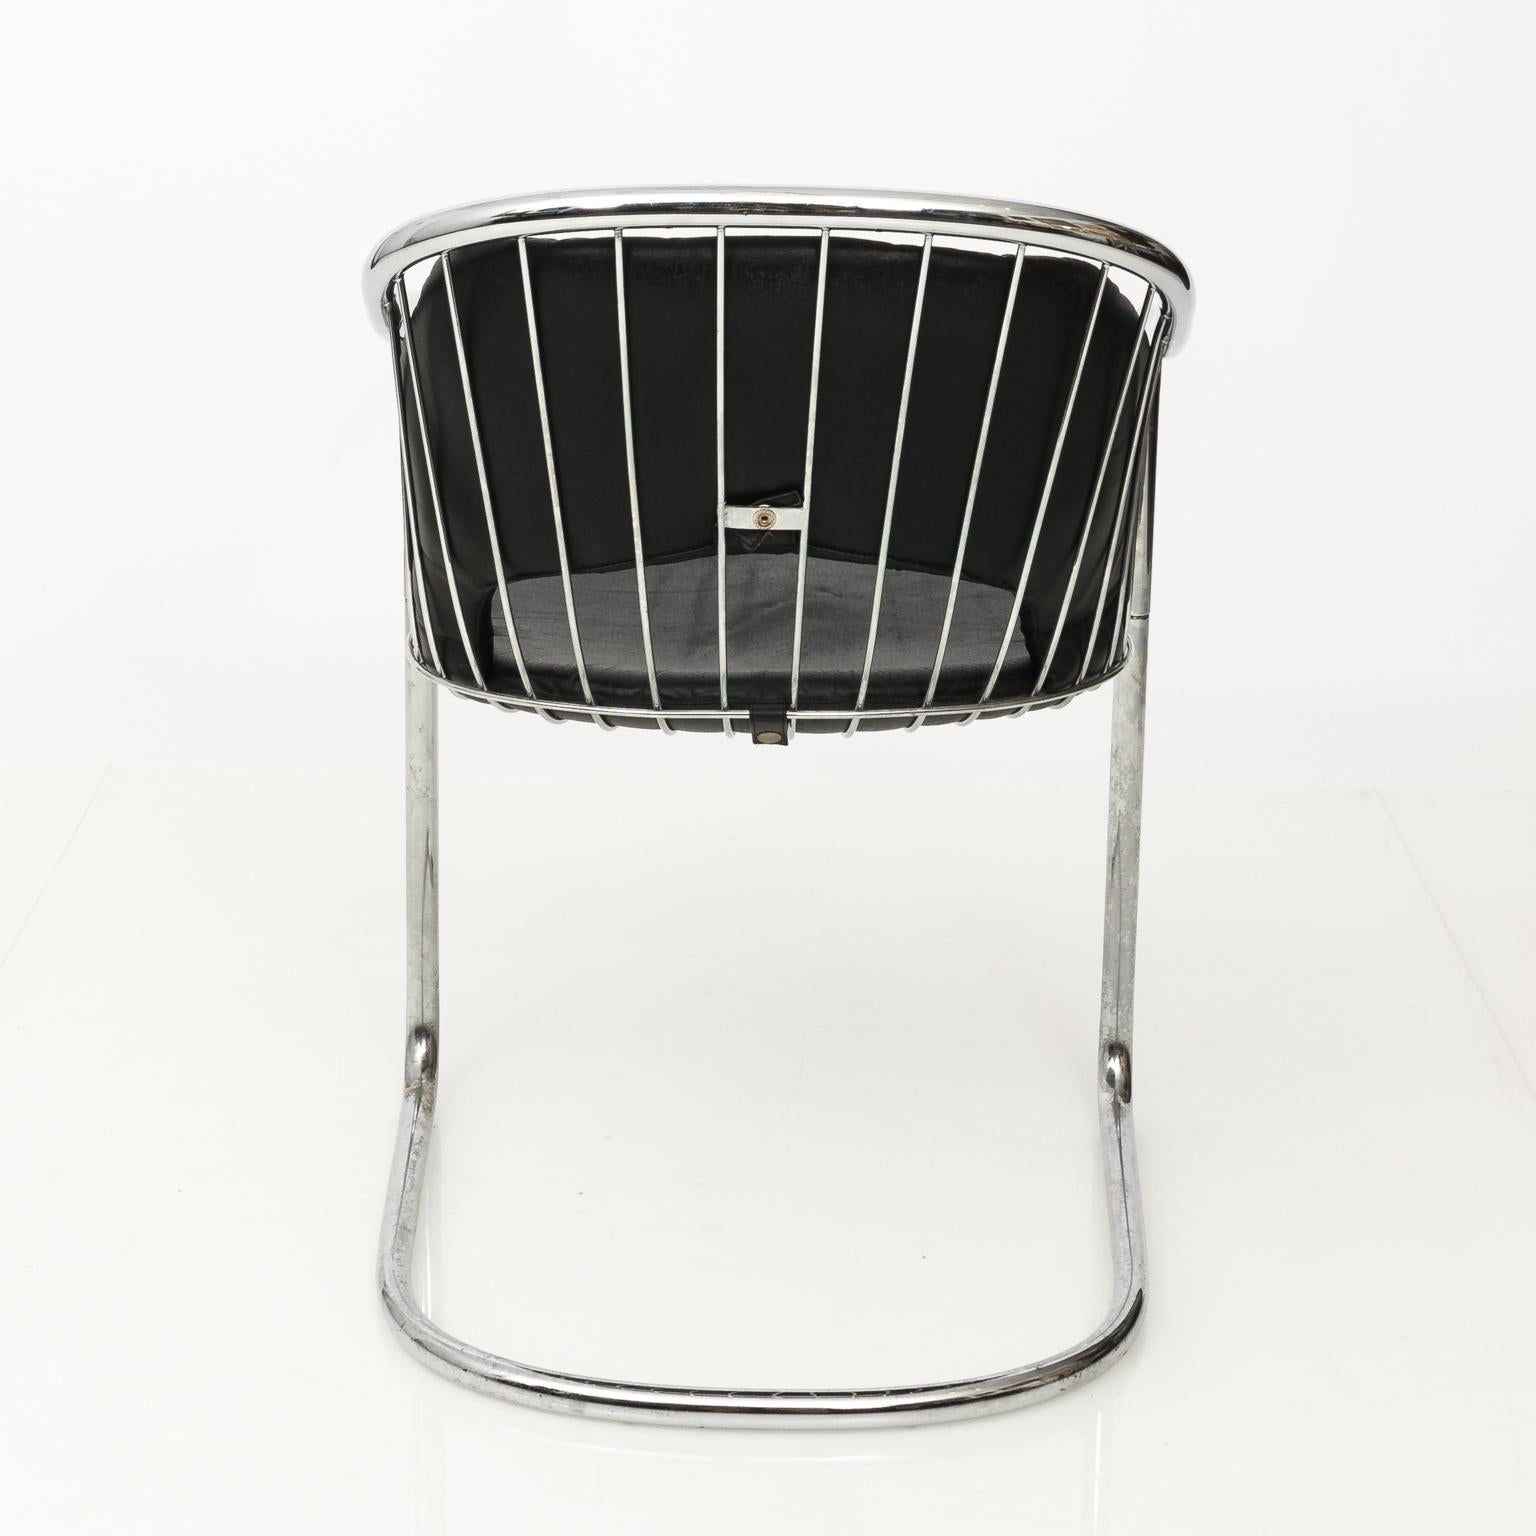 Mid-Century Modern style Italian chrome and black leather armchair with cantilever bases by Cidue, circa 1970s.
   